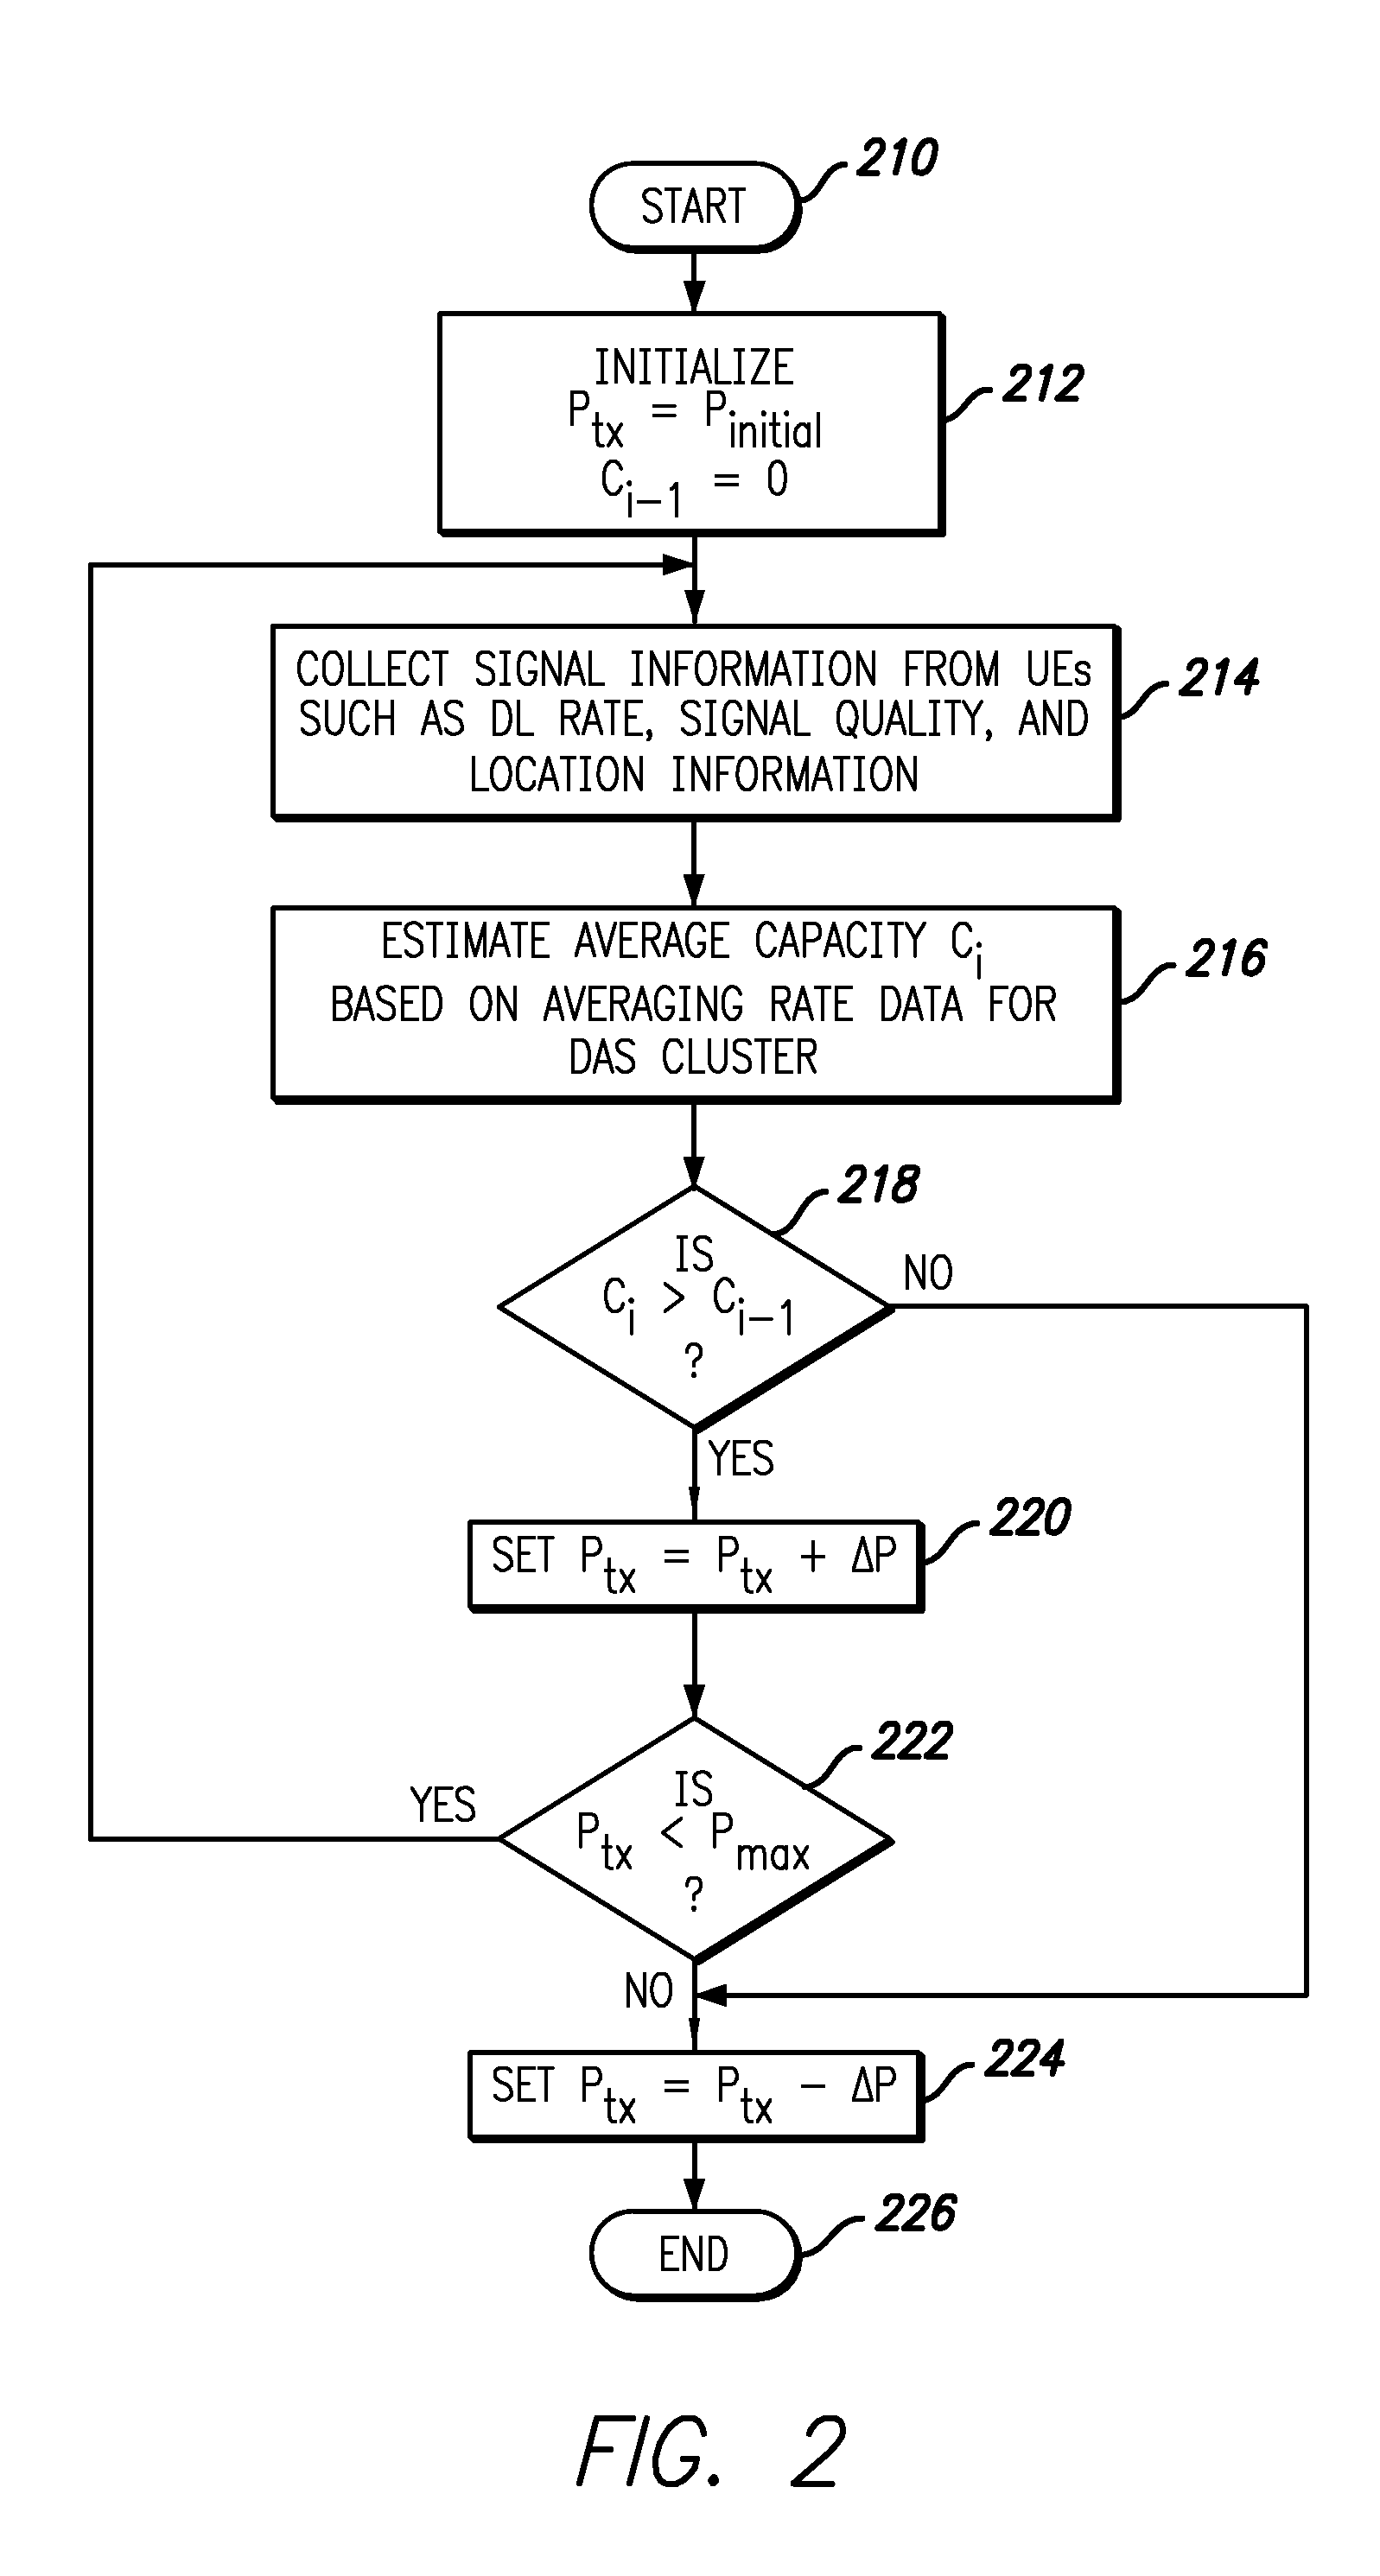 System and method for performance enhancement in heterogeneous wireless access network employing distributed antenna system